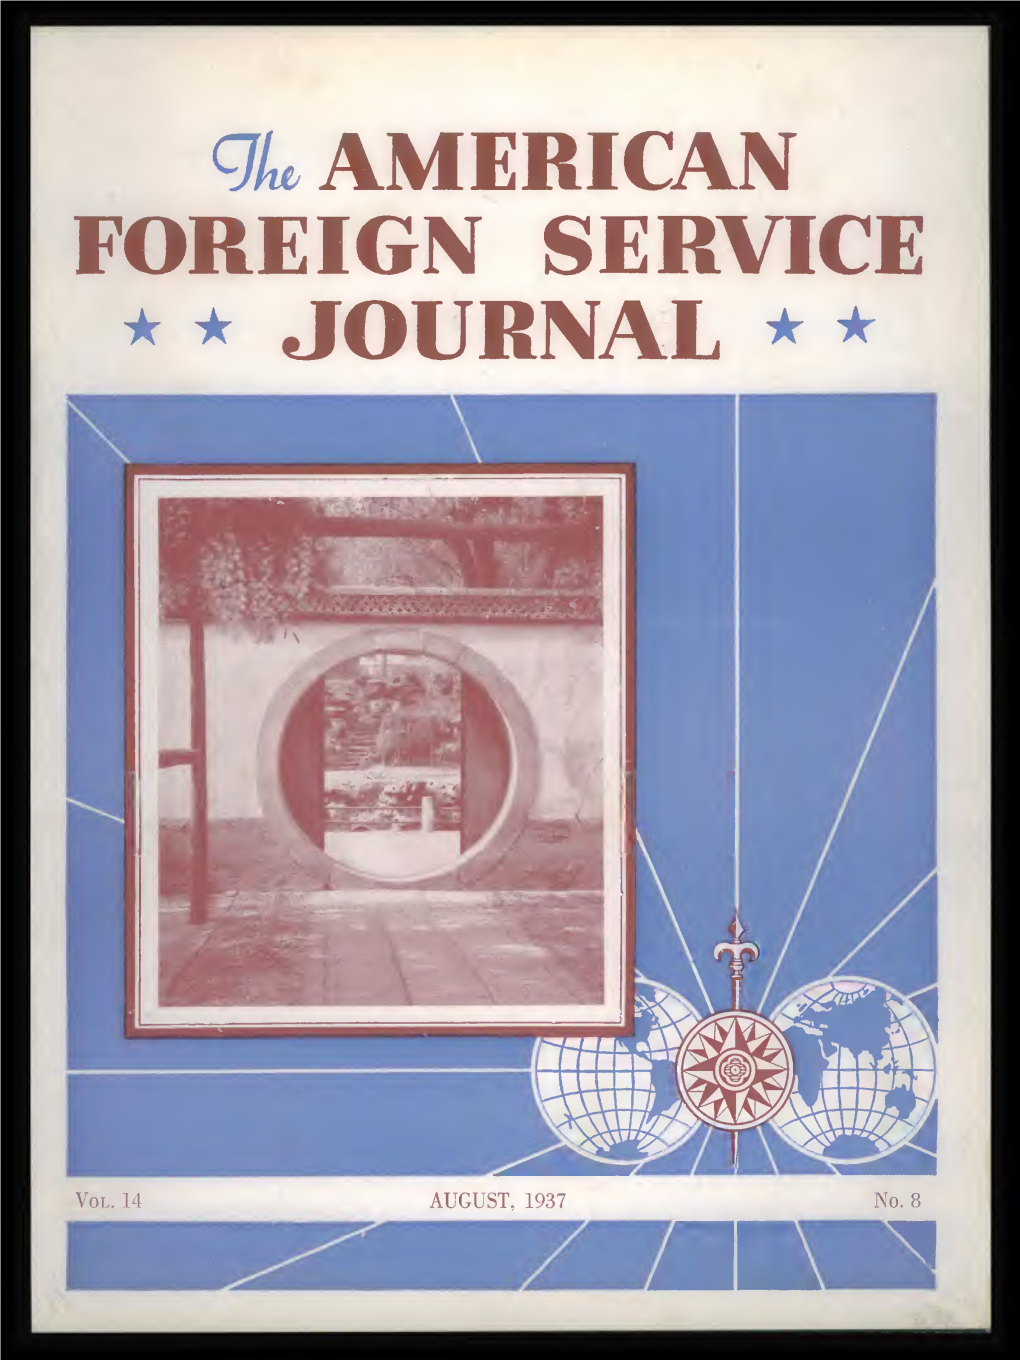 The Foreign Service Journal, August 1937